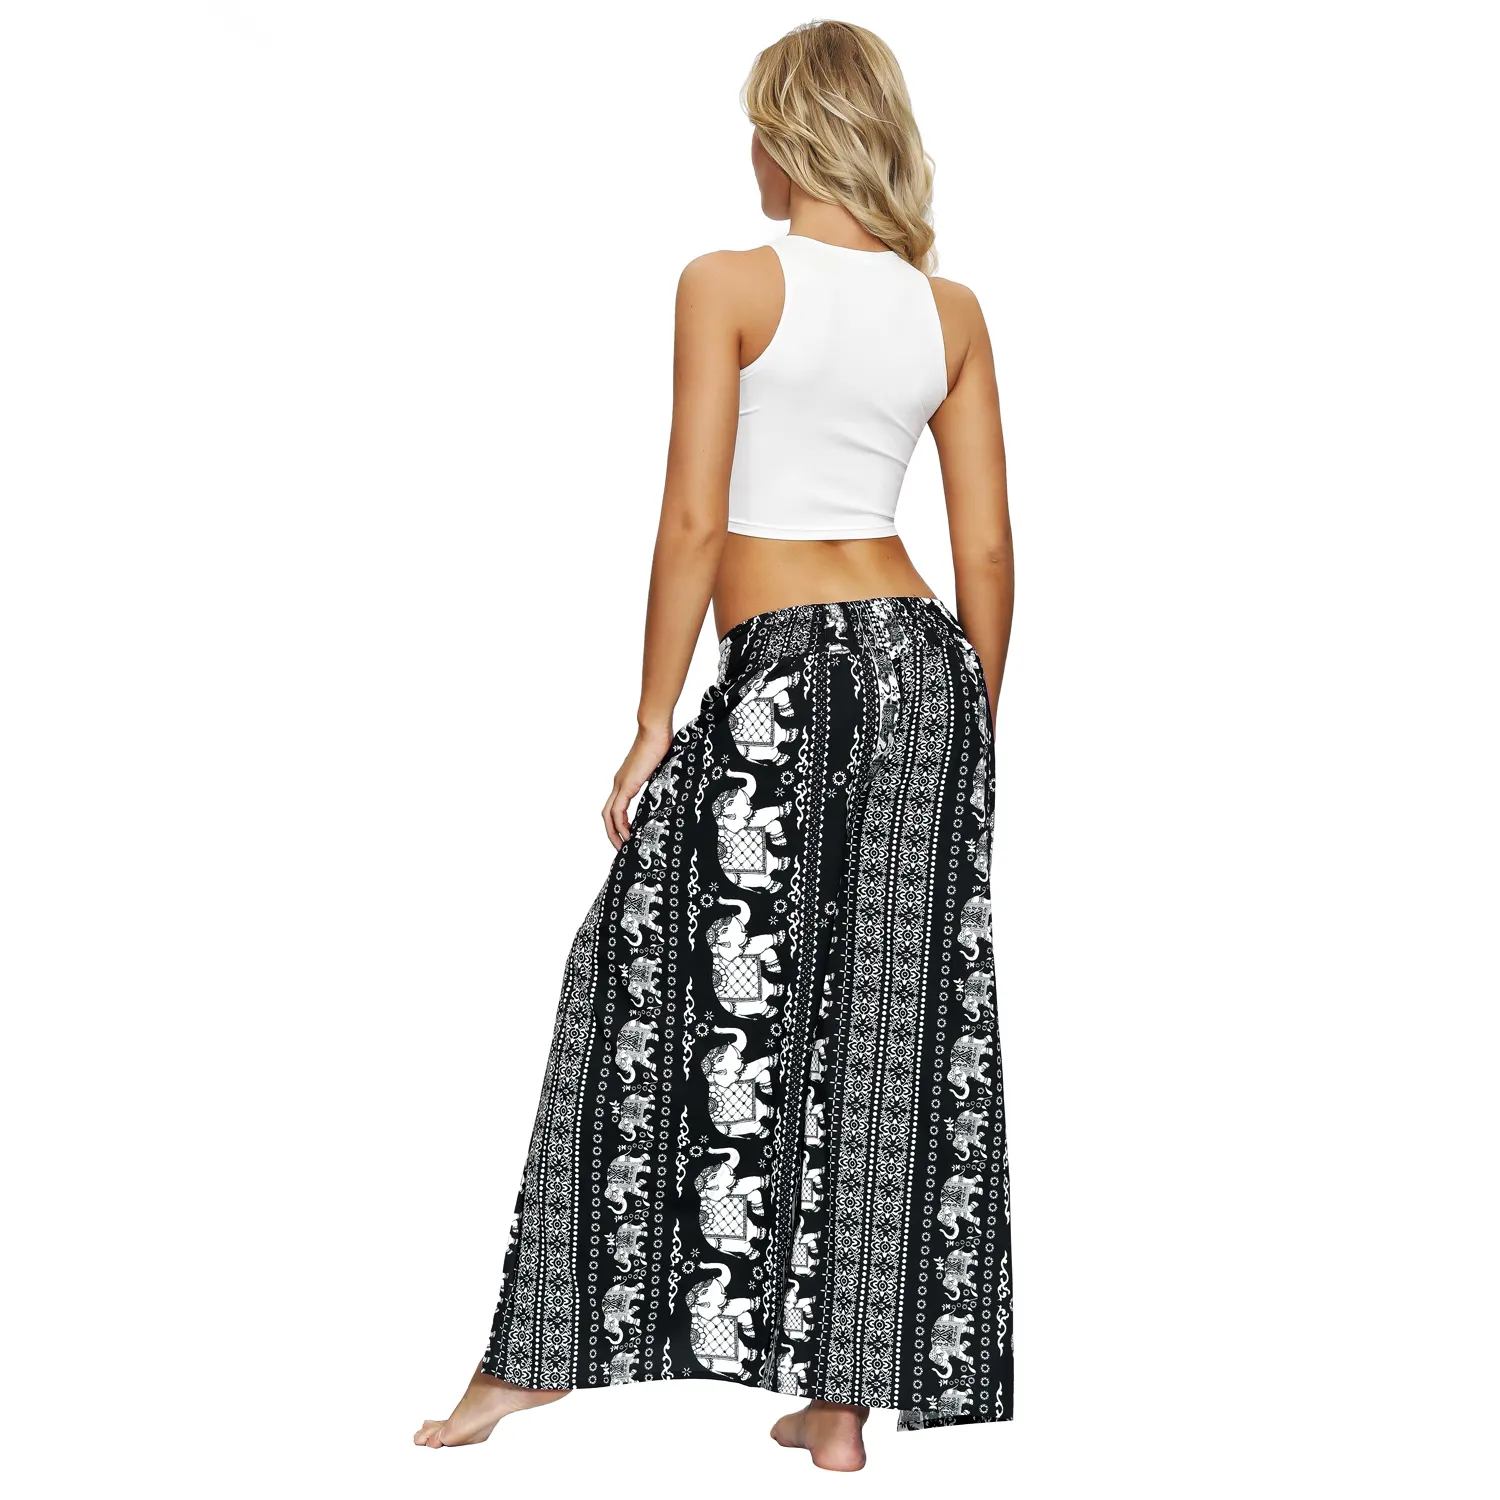 2021 new design of organic black printing women's casual wide leg pants hanging loose yoga pants wholesale in Europe and th